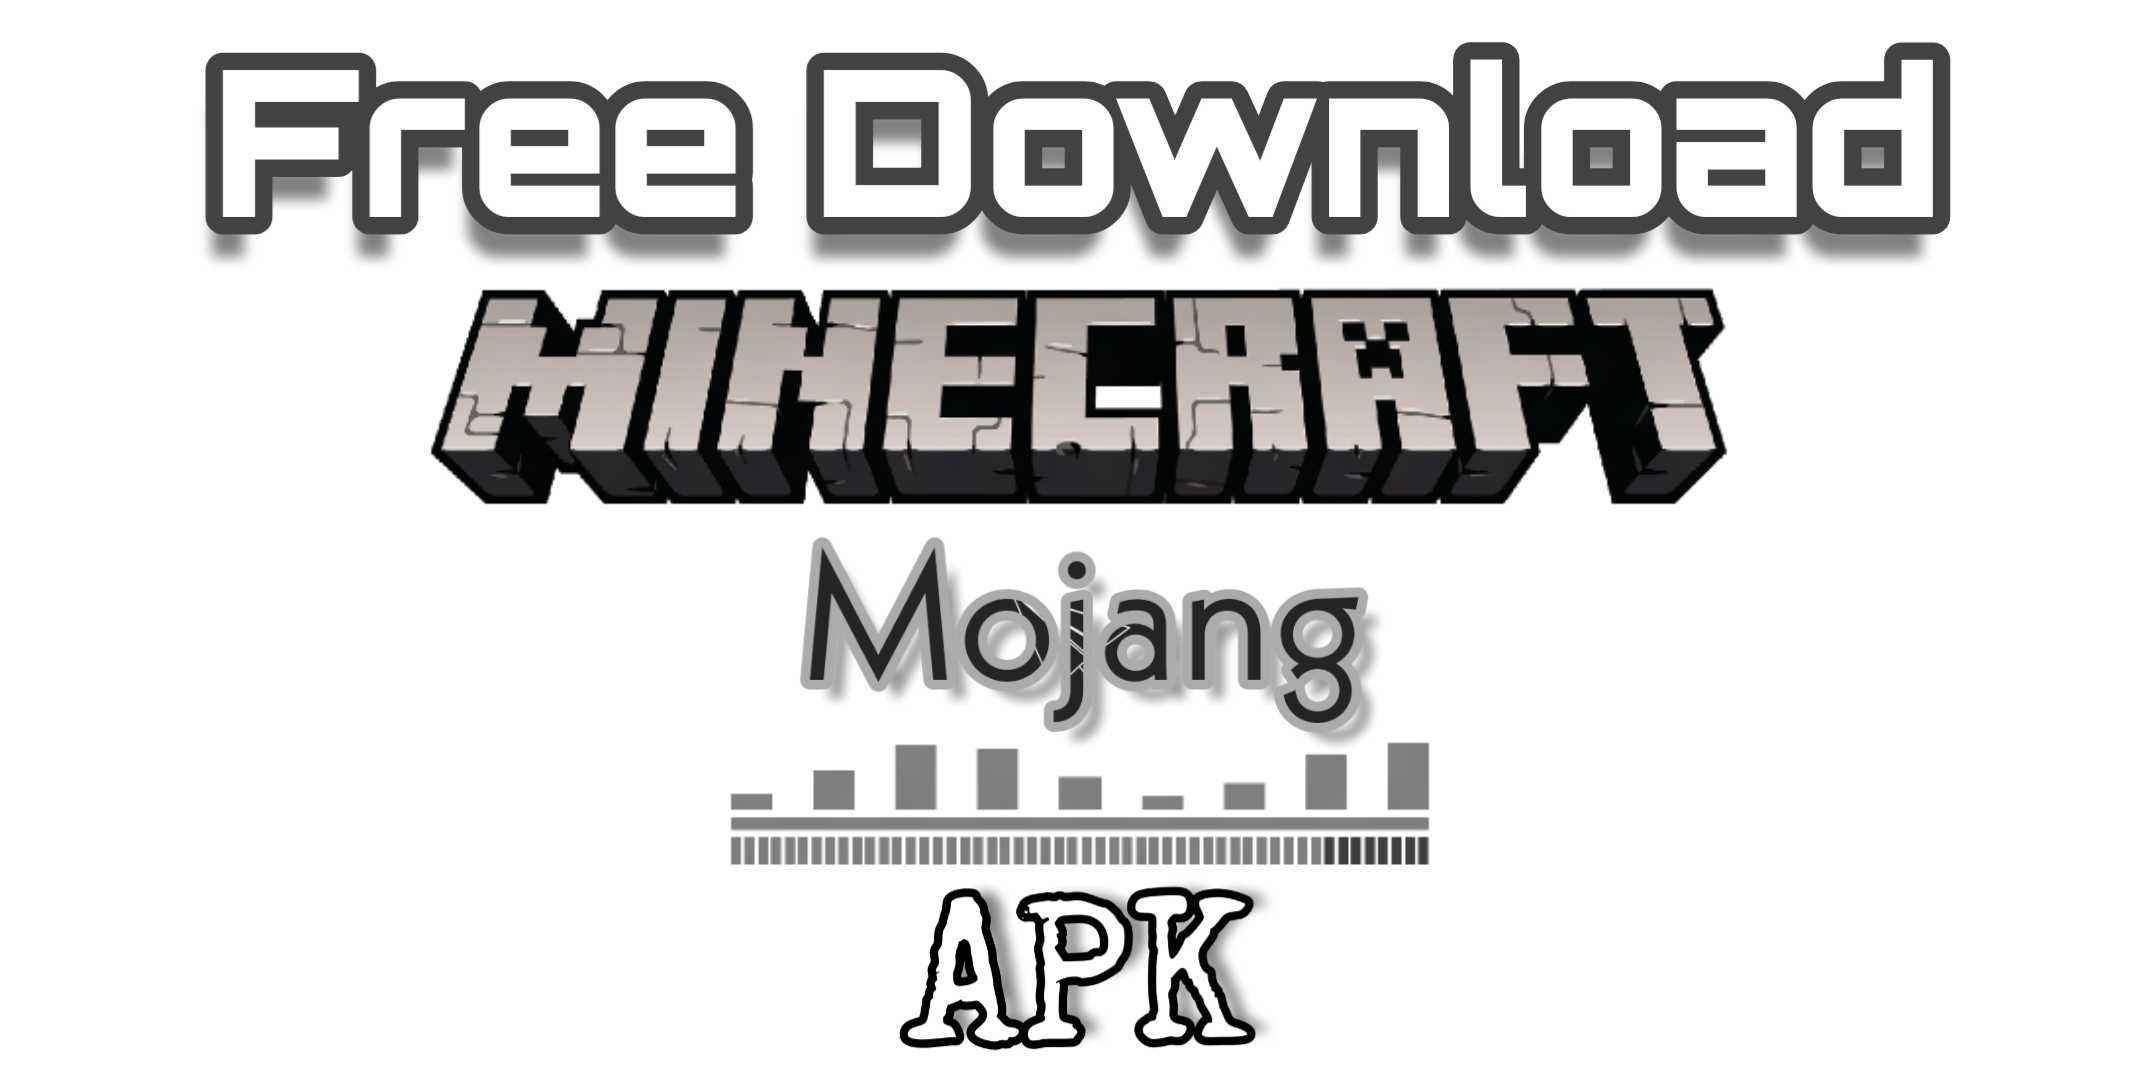 mojang minecraft download for free